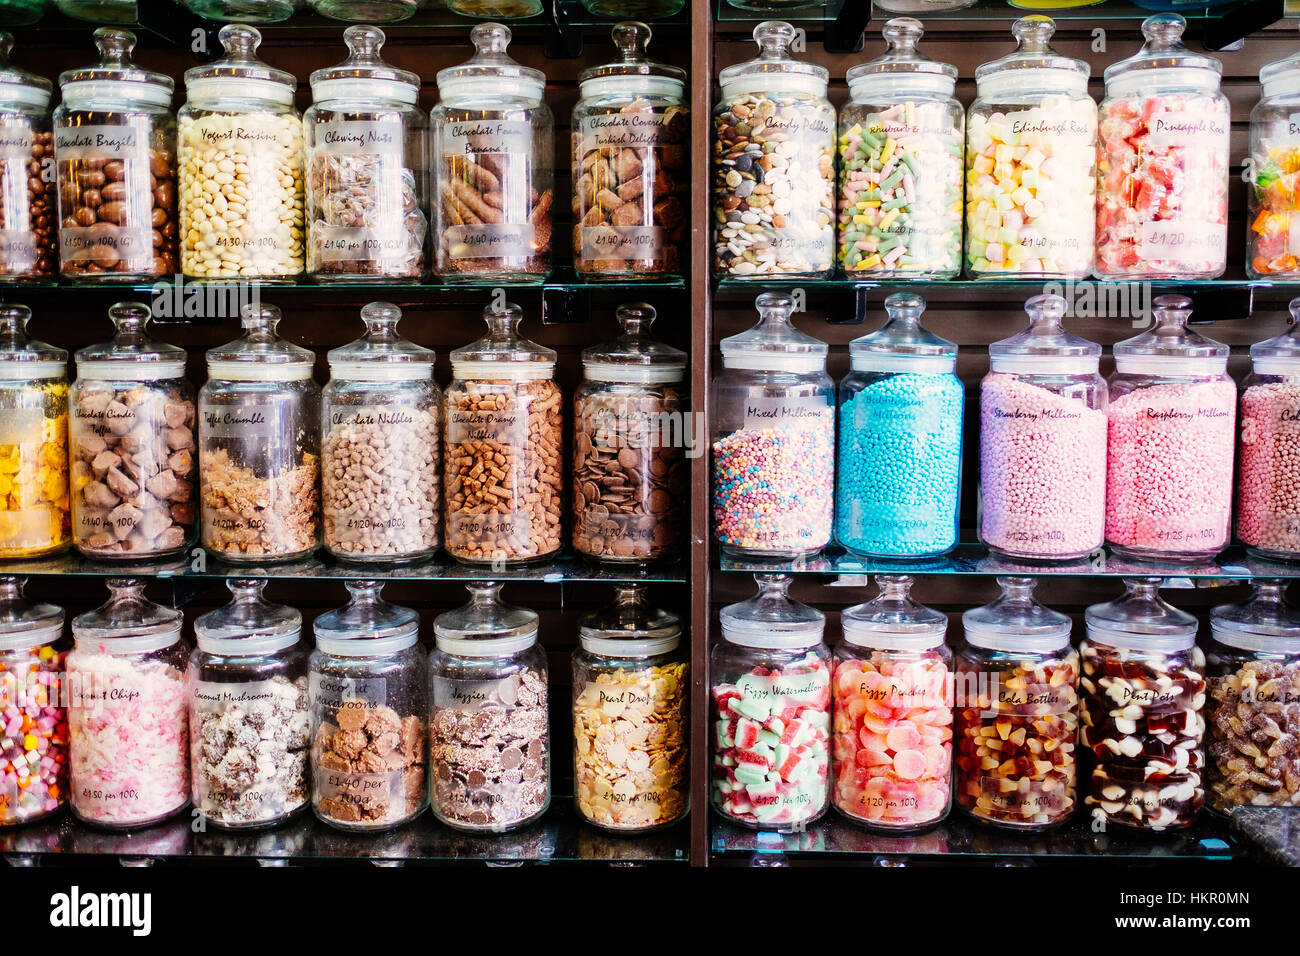 A traditional display of jars in a sweet shop in Dorset, England, UK Stock Photo